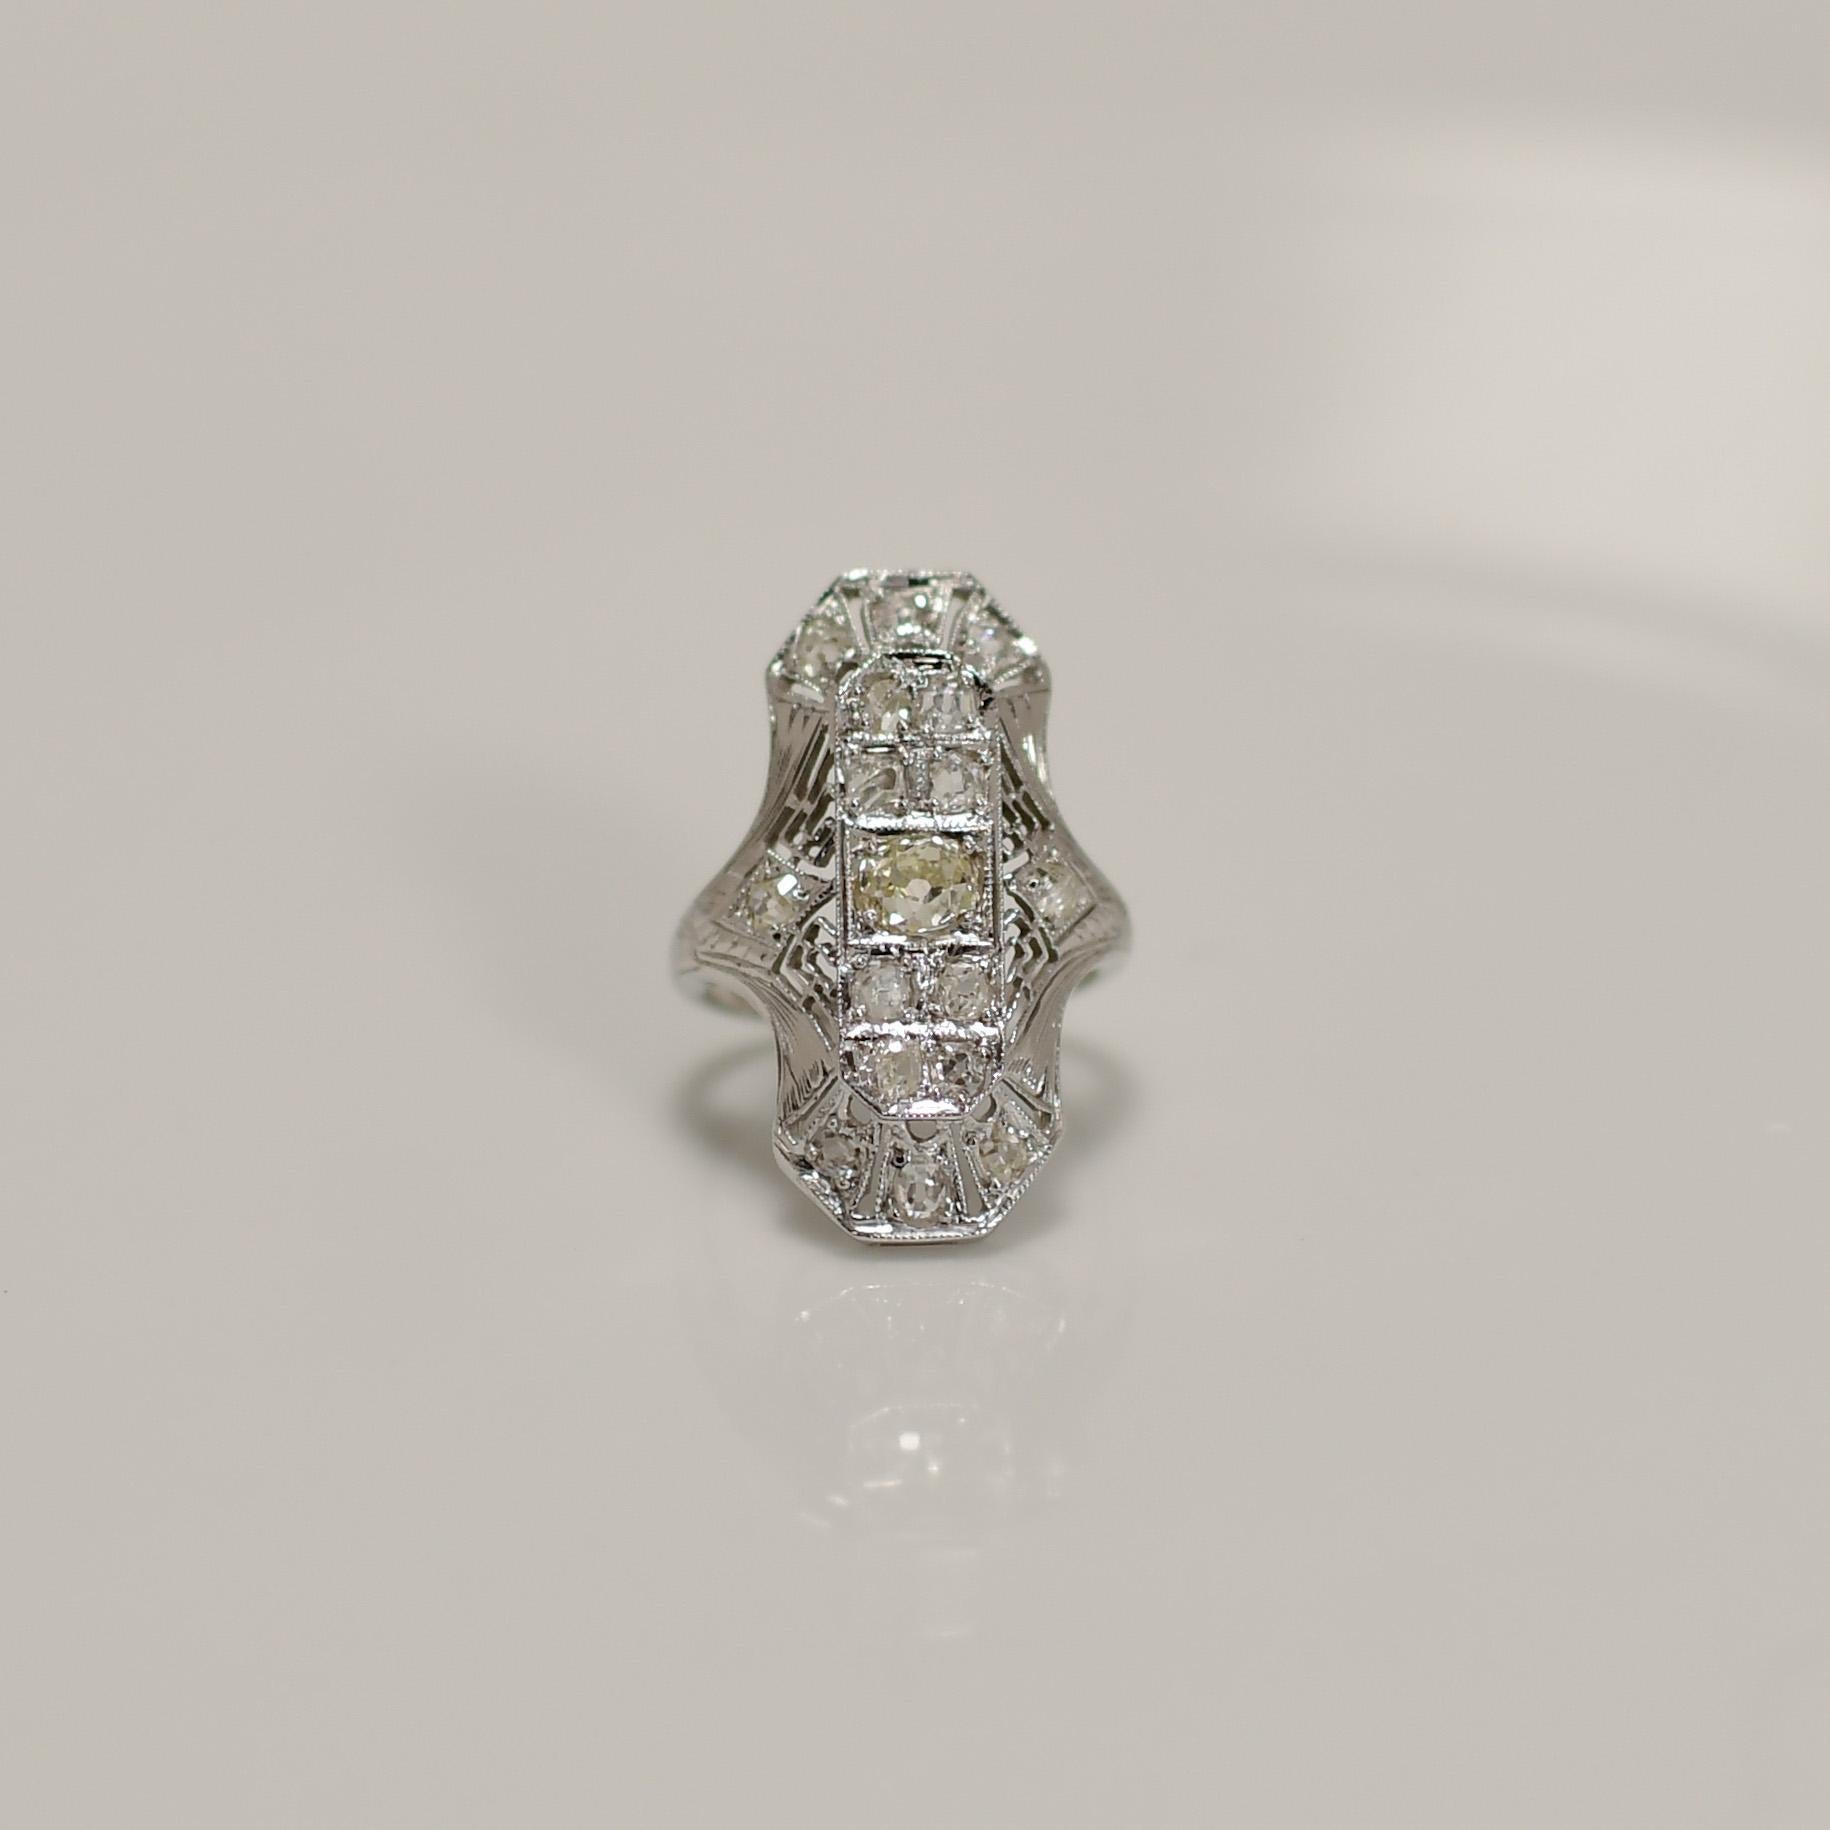 Elevate your jewelry collection with the timeless beauty of this Filigree Art Deco 18K White Gold Shield Ring, featuring a captivating Fancy Light Yellow Diamond in an Old Mine cut. The intricate filigree work on the white gold setting adds a touch